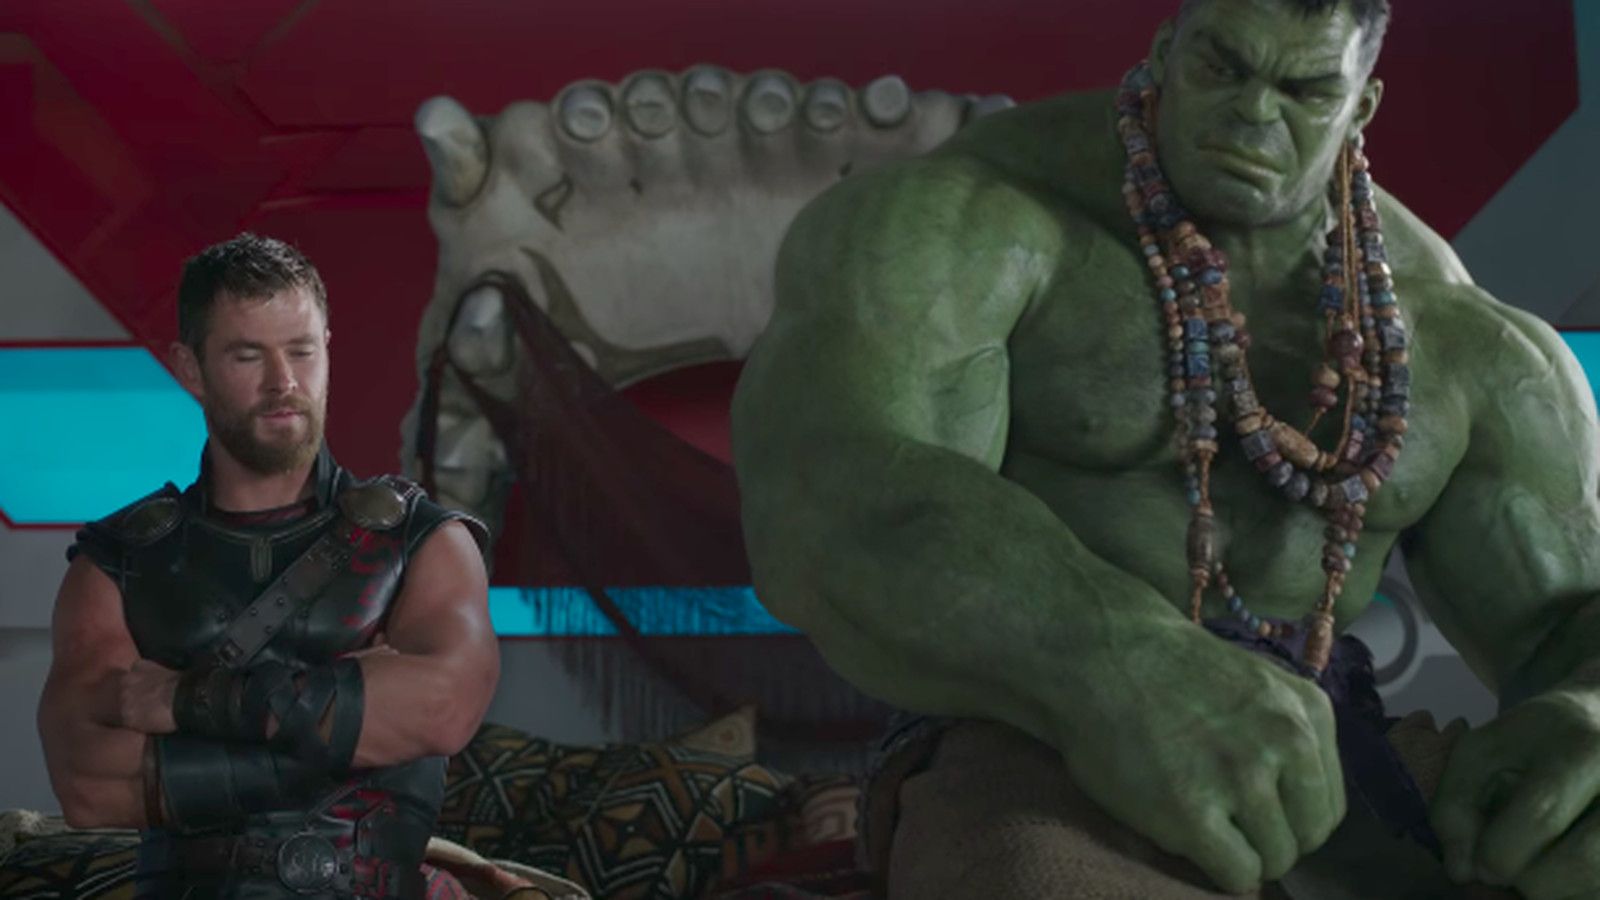 Hulk learns to talk in the new trailer for Thor: Ragnarok